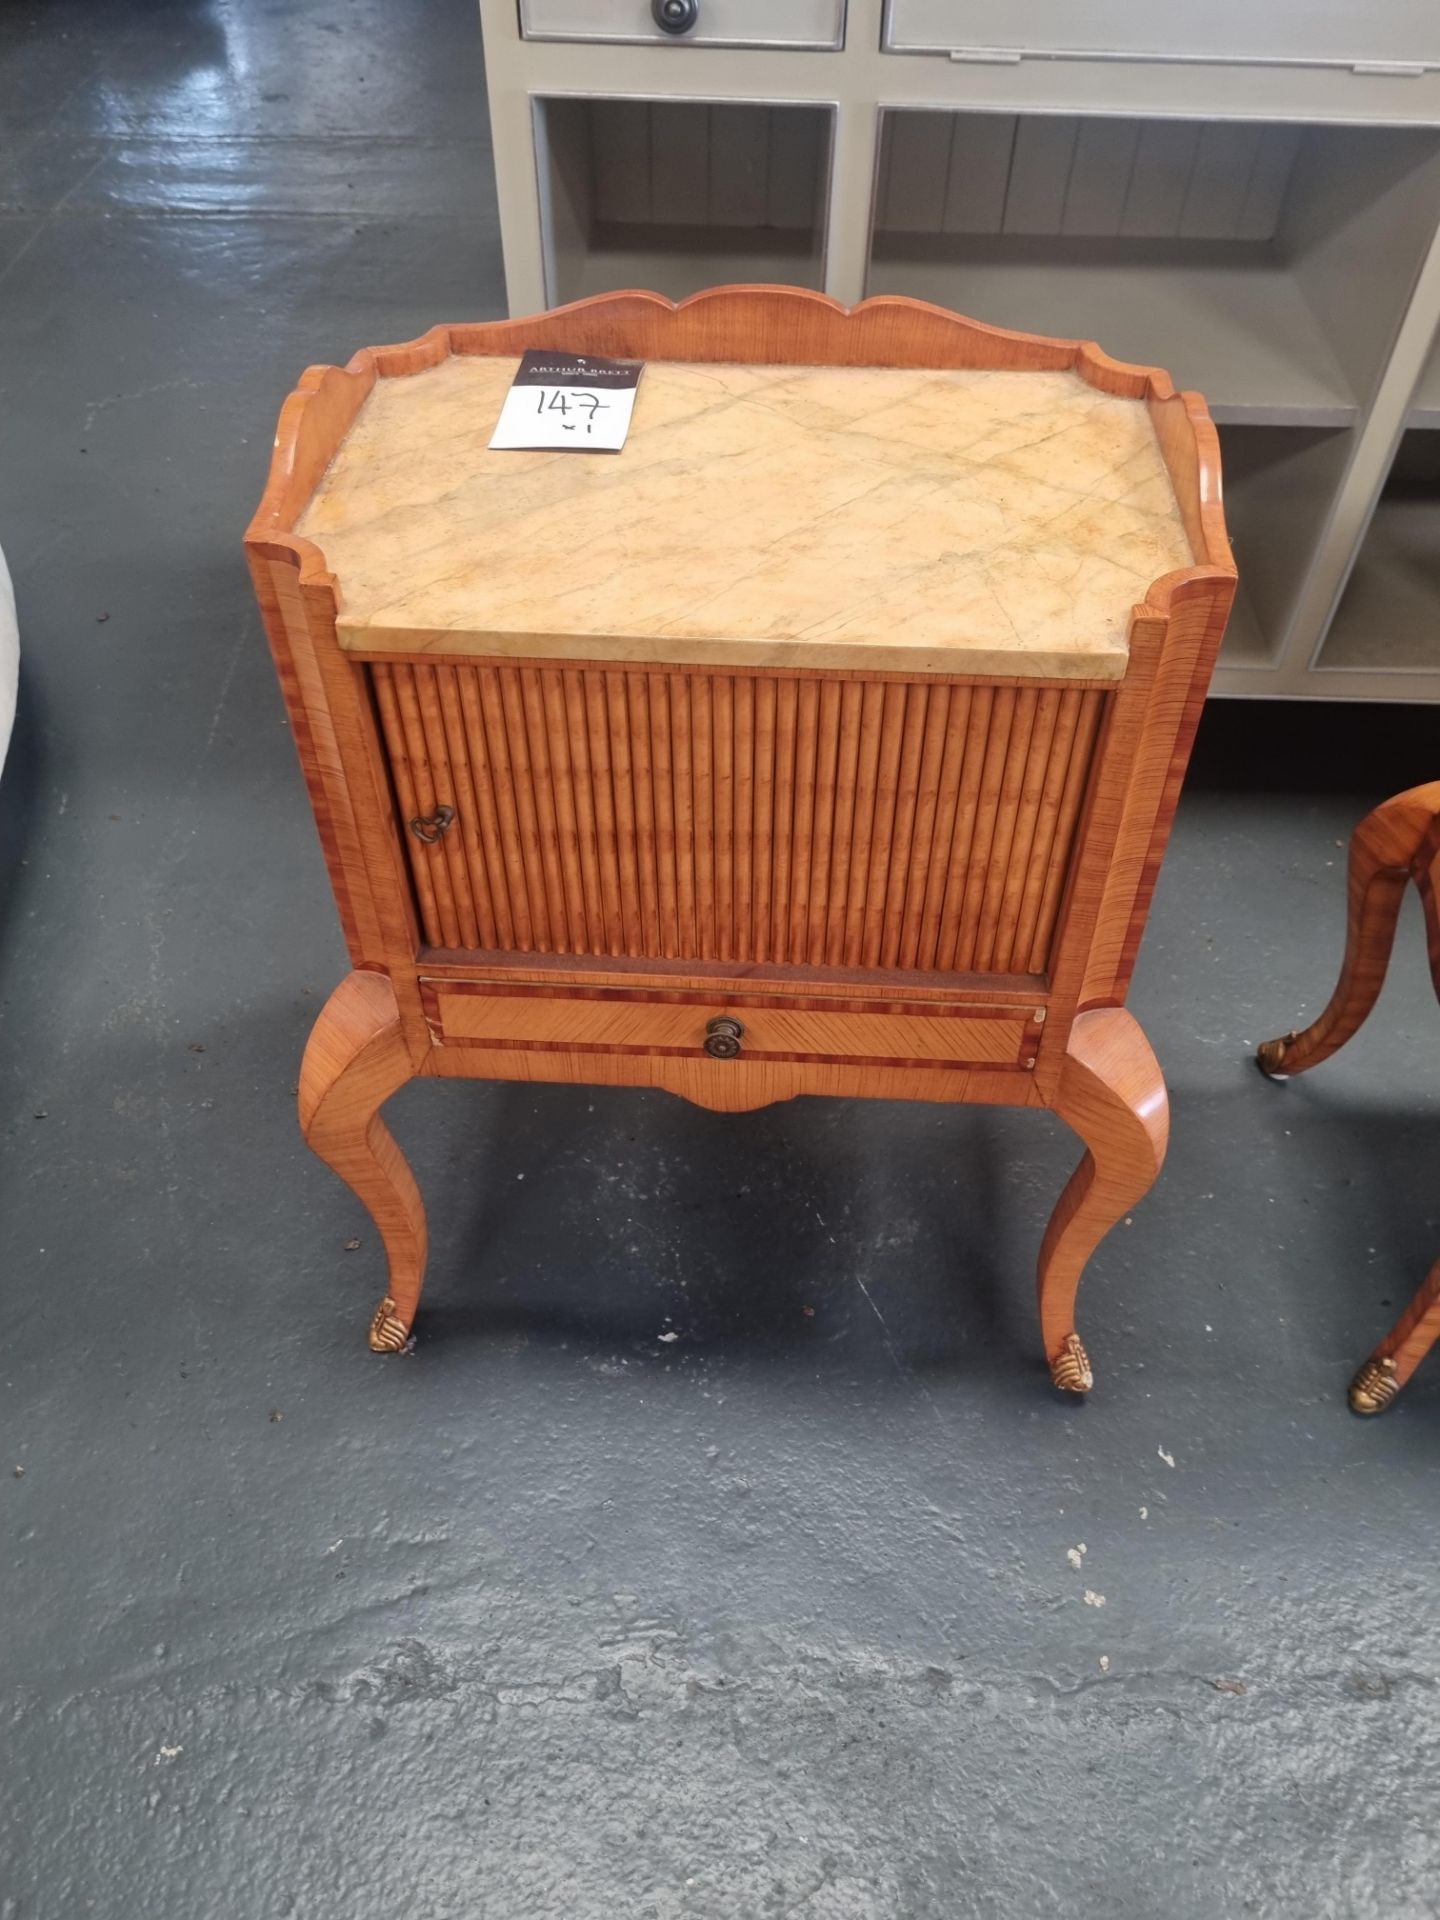 Bedside Table With Sliding Door And Draw On Bowed Legs With Brass Feet Broken Leg/Foot Height 65cm